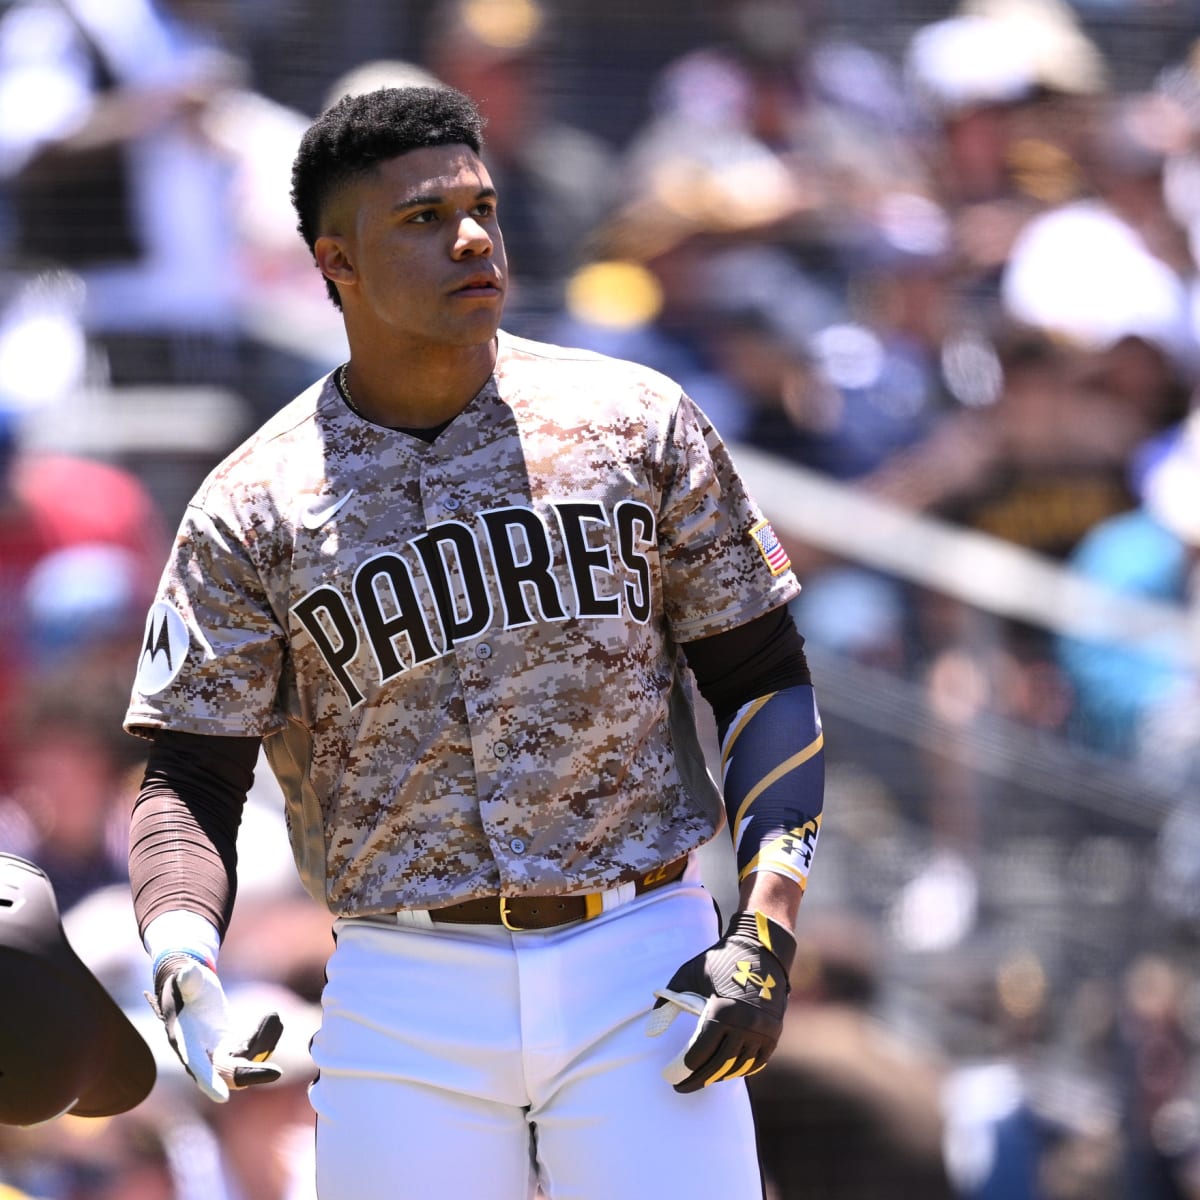 The Padres are wearing the ugliest unis I have ever seen. Camo